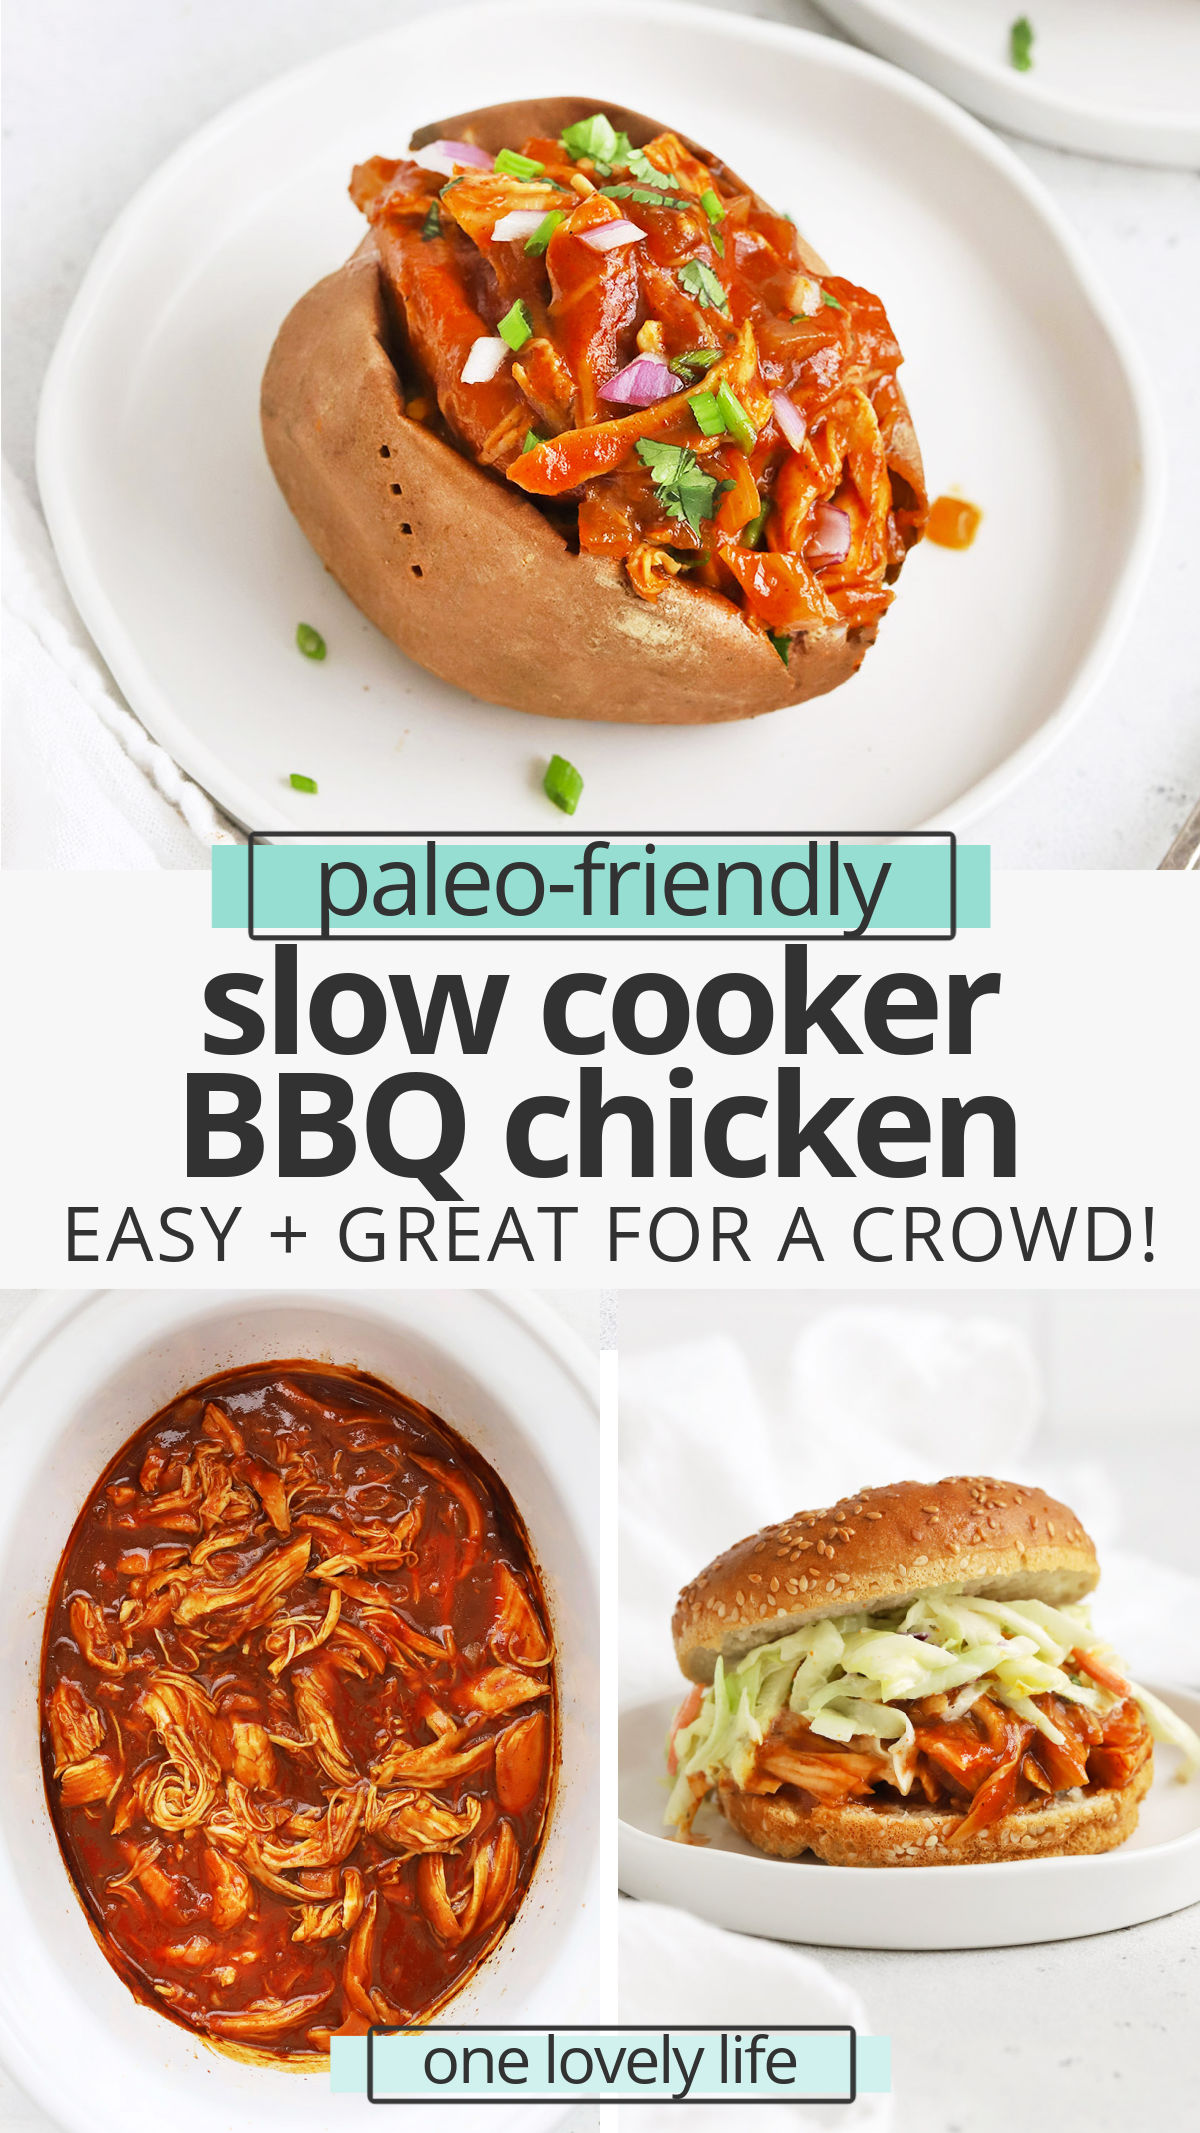 Slow Cooker BBQ Chicken - This tender crockpot barbecue chicken makes for delicious sandwiches, salads, pizzas & more! (Paleo-Friendly) // Crock Pot BBQ Chicken // Slow Cooker Barbecue Chicken Recipe // Slow Cooker Chicken // Summer recipe // Dinner for a crowd #bbq #chicken #slowcooker #easydinner